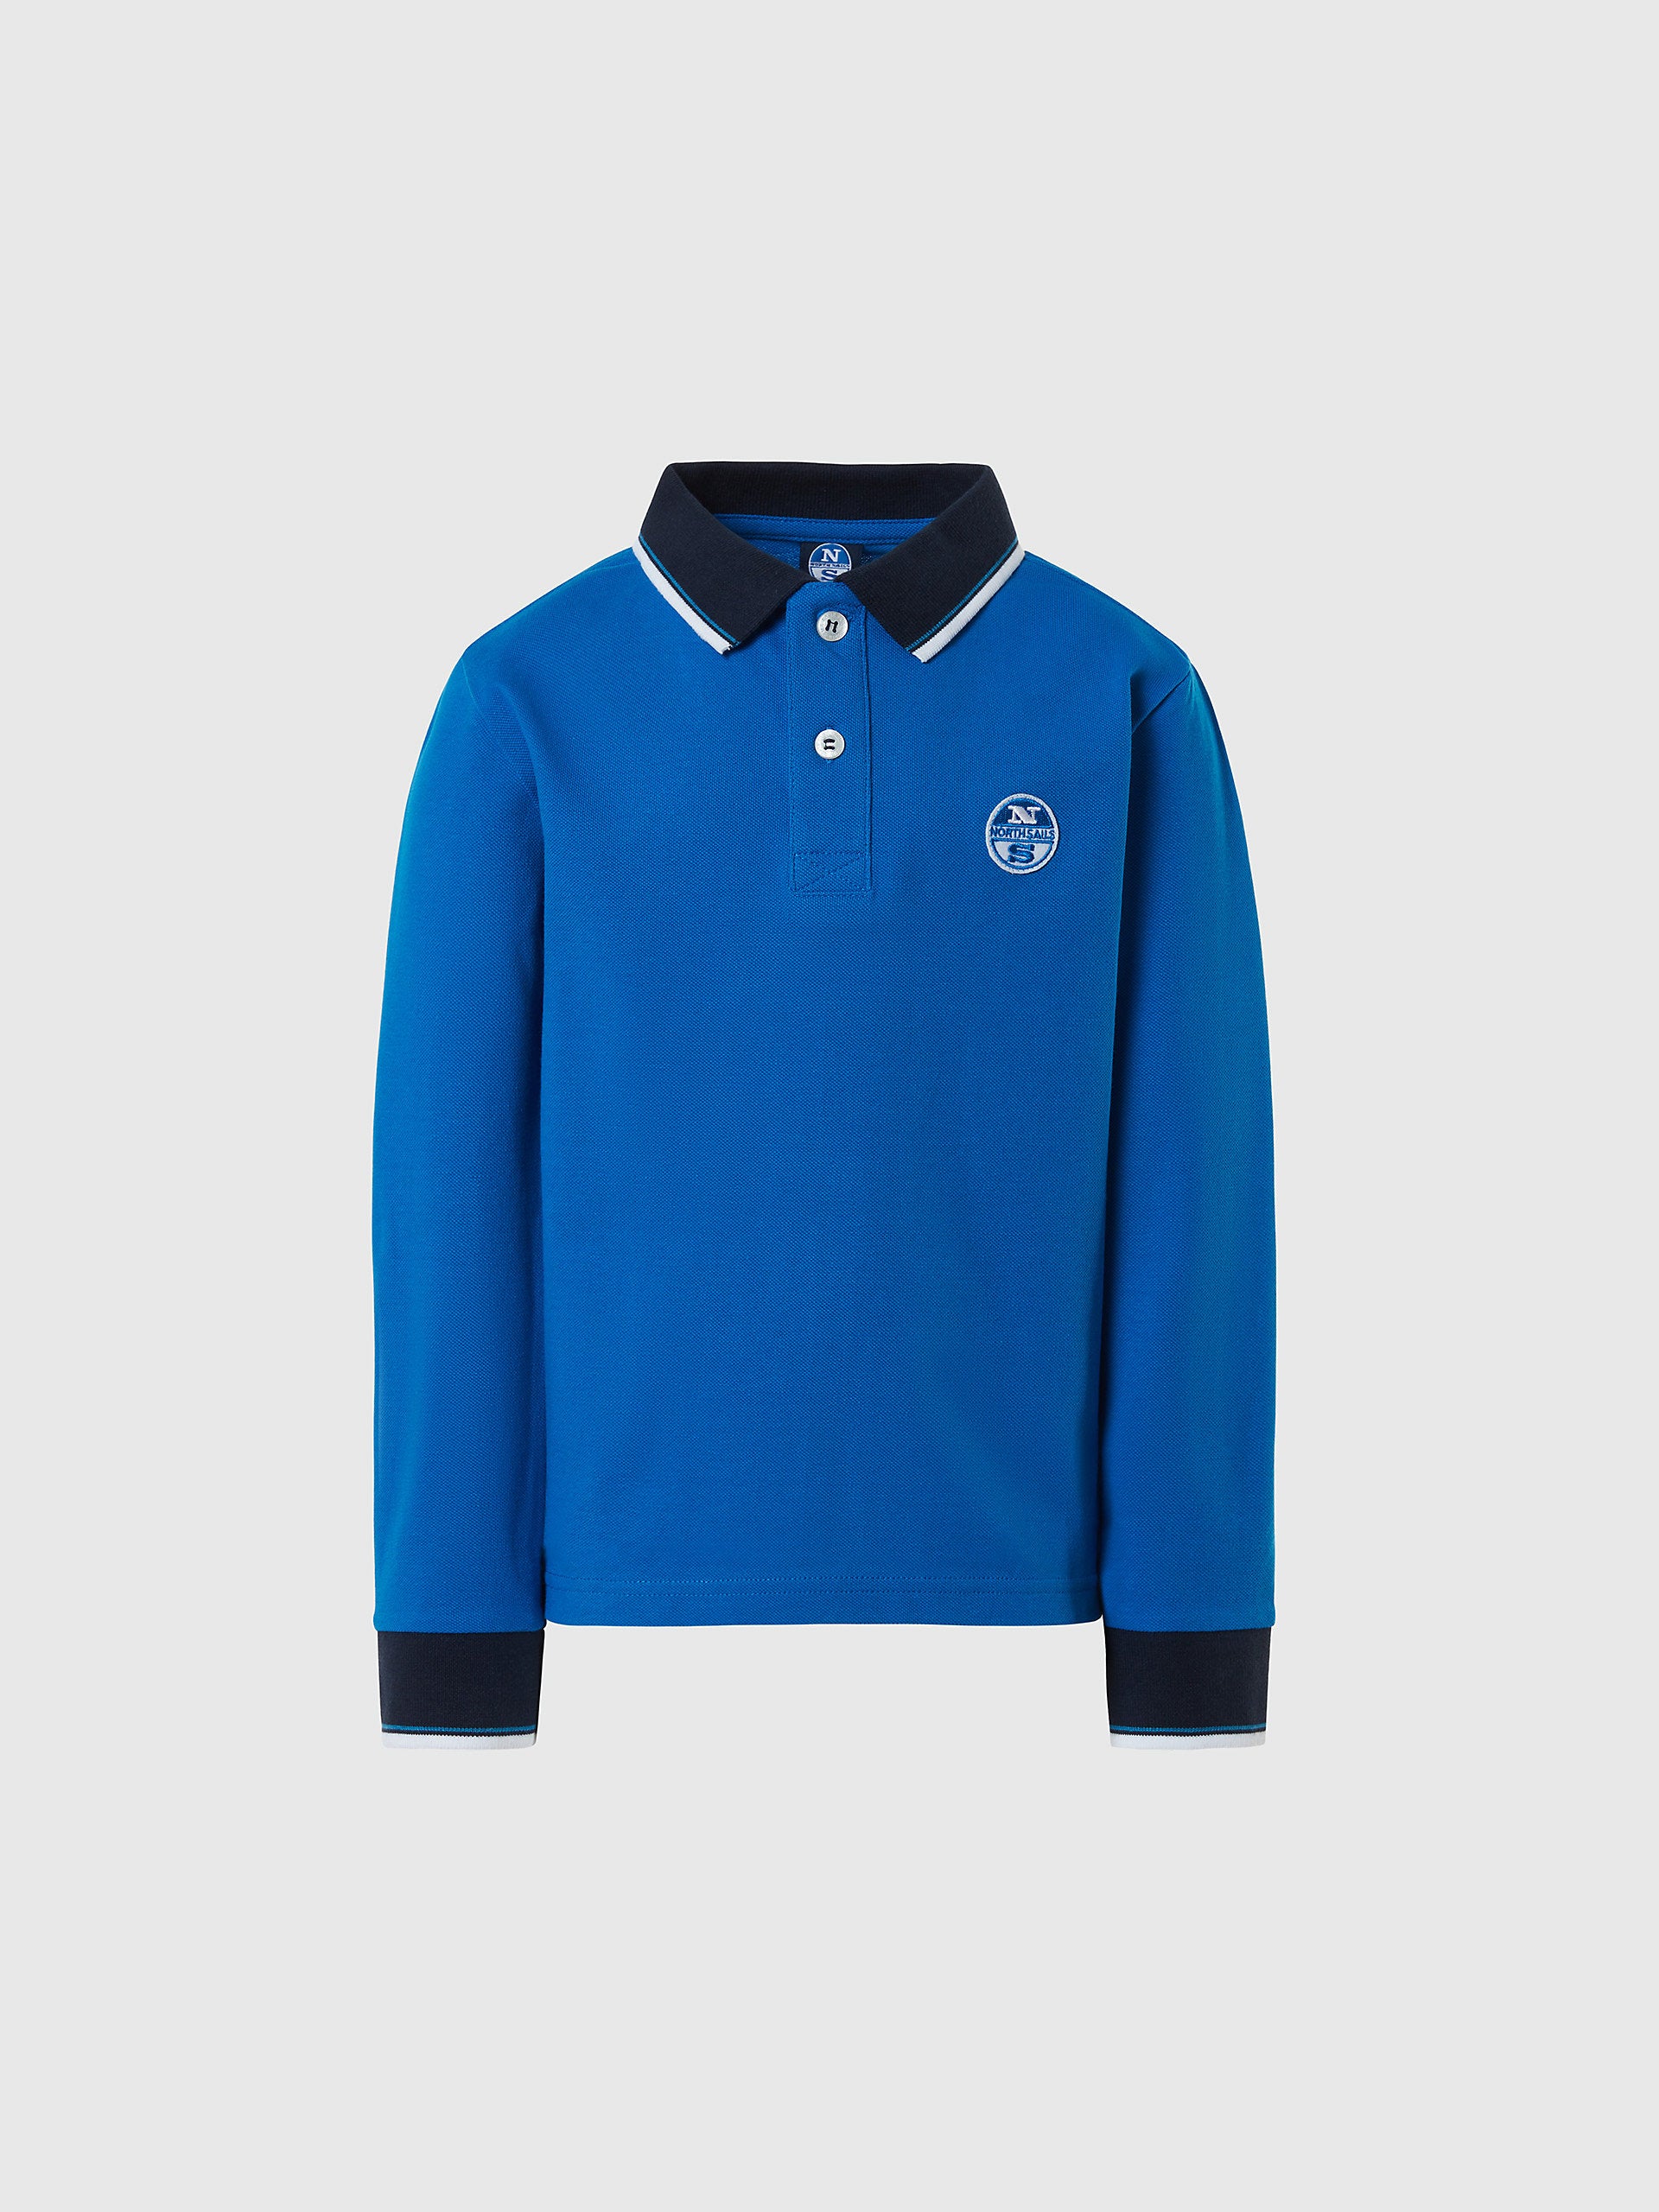 North Sails - Long-sleeved polo shirtNorth SailsImperial blue8